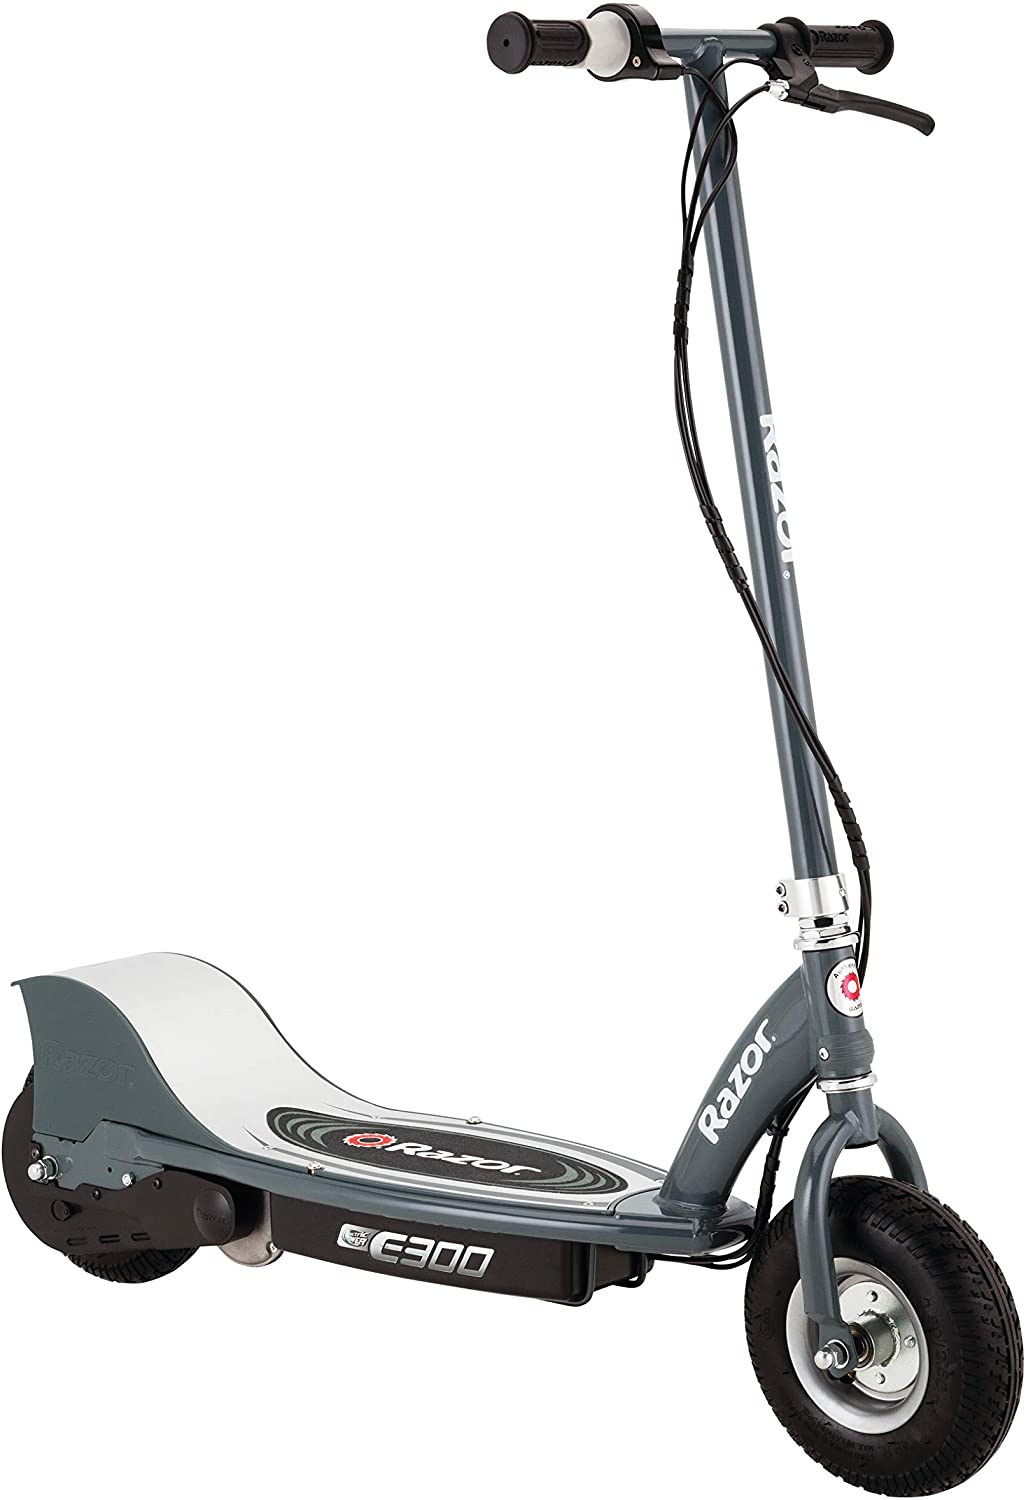 E300 Electric Scooter Gray